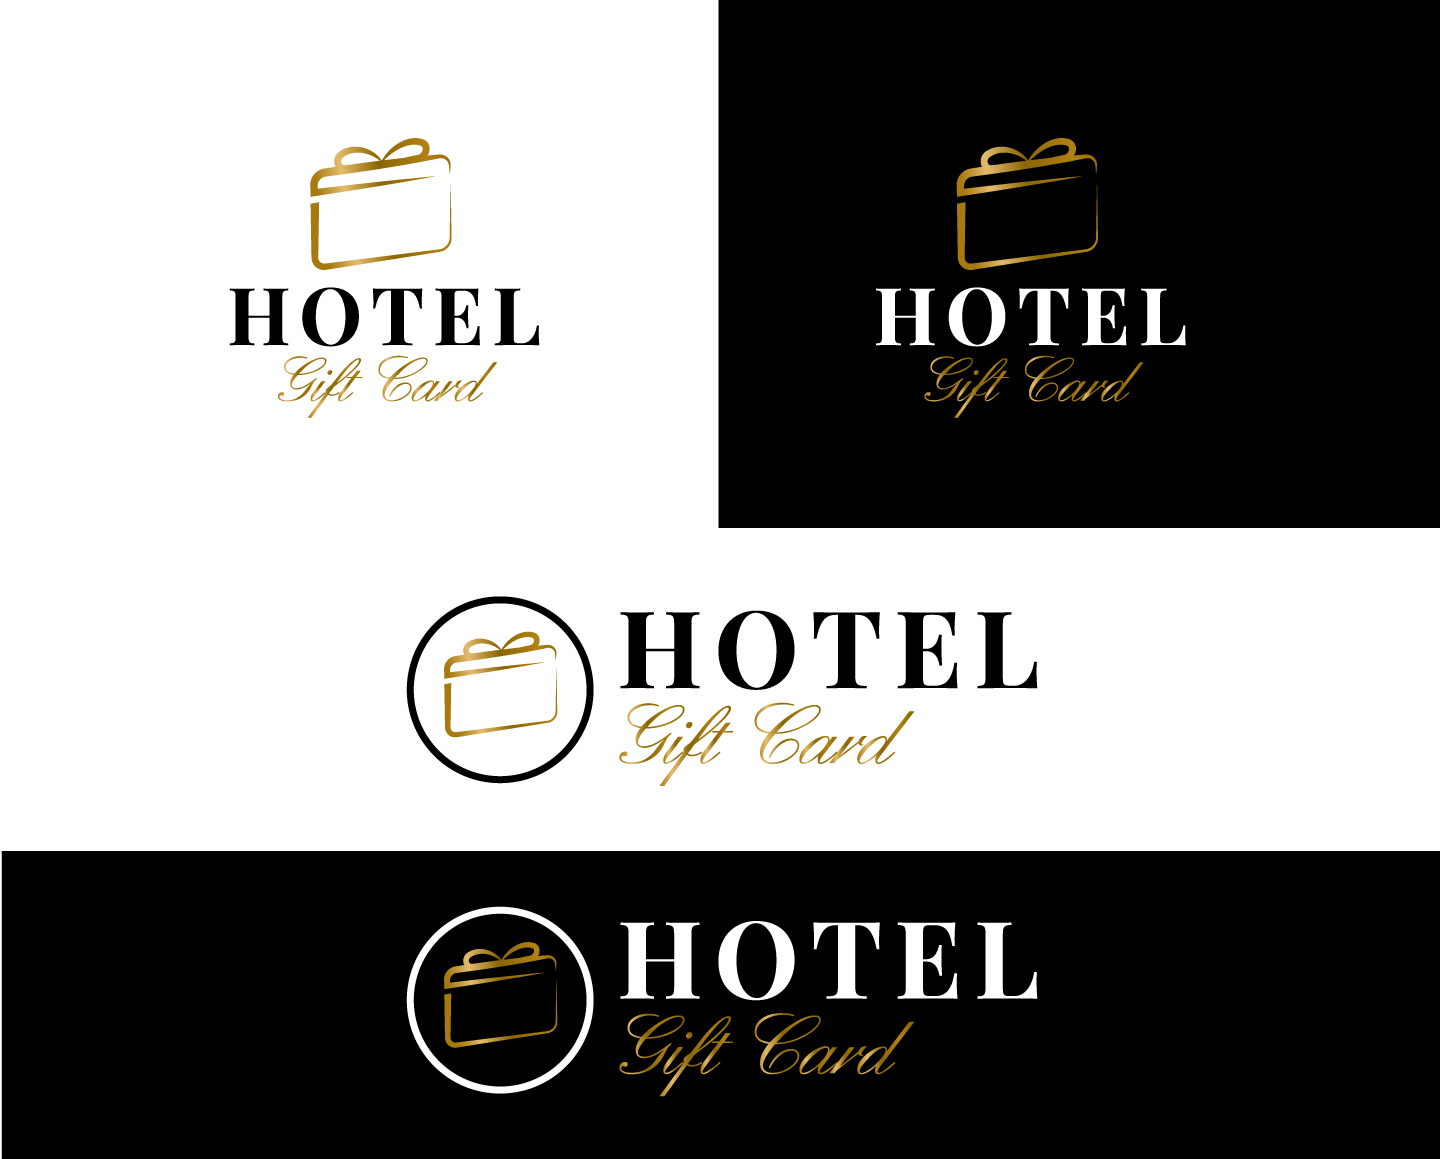 Hotel-Gift-Card.png